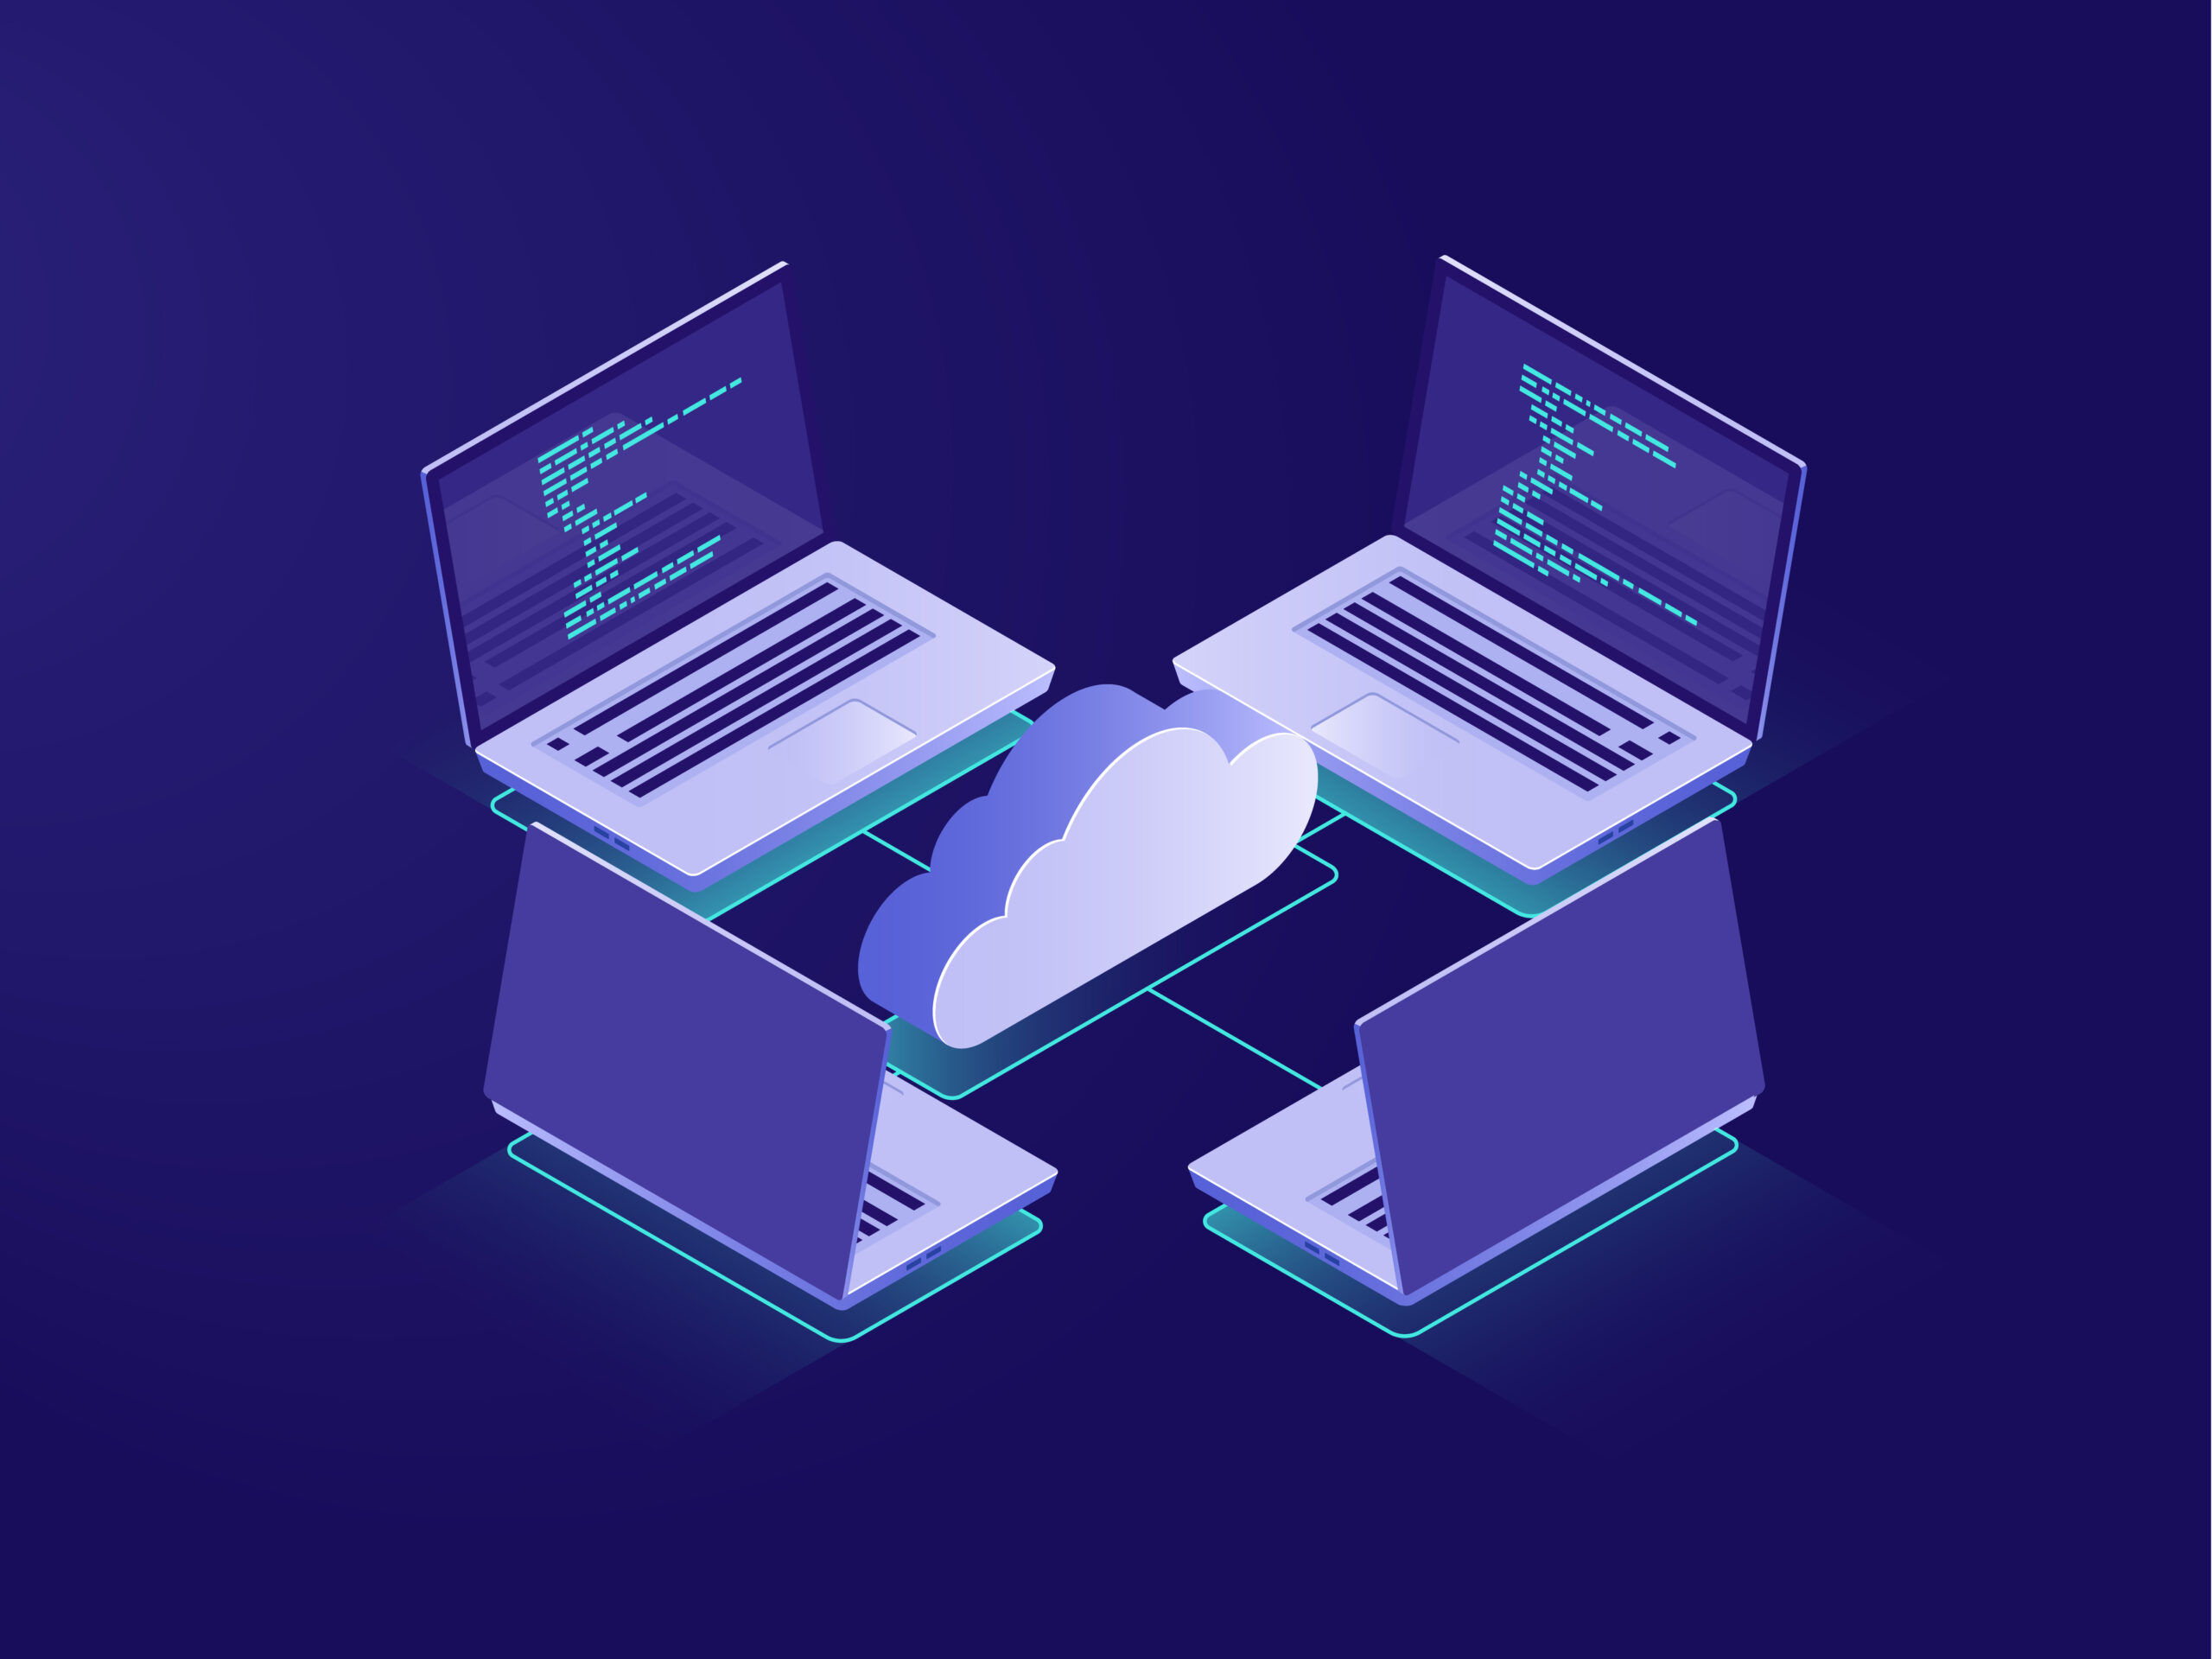 Networking with four laptops, internet connection, cloud data storage, server room, backup files, database remote access isometric illustration vector neon dark